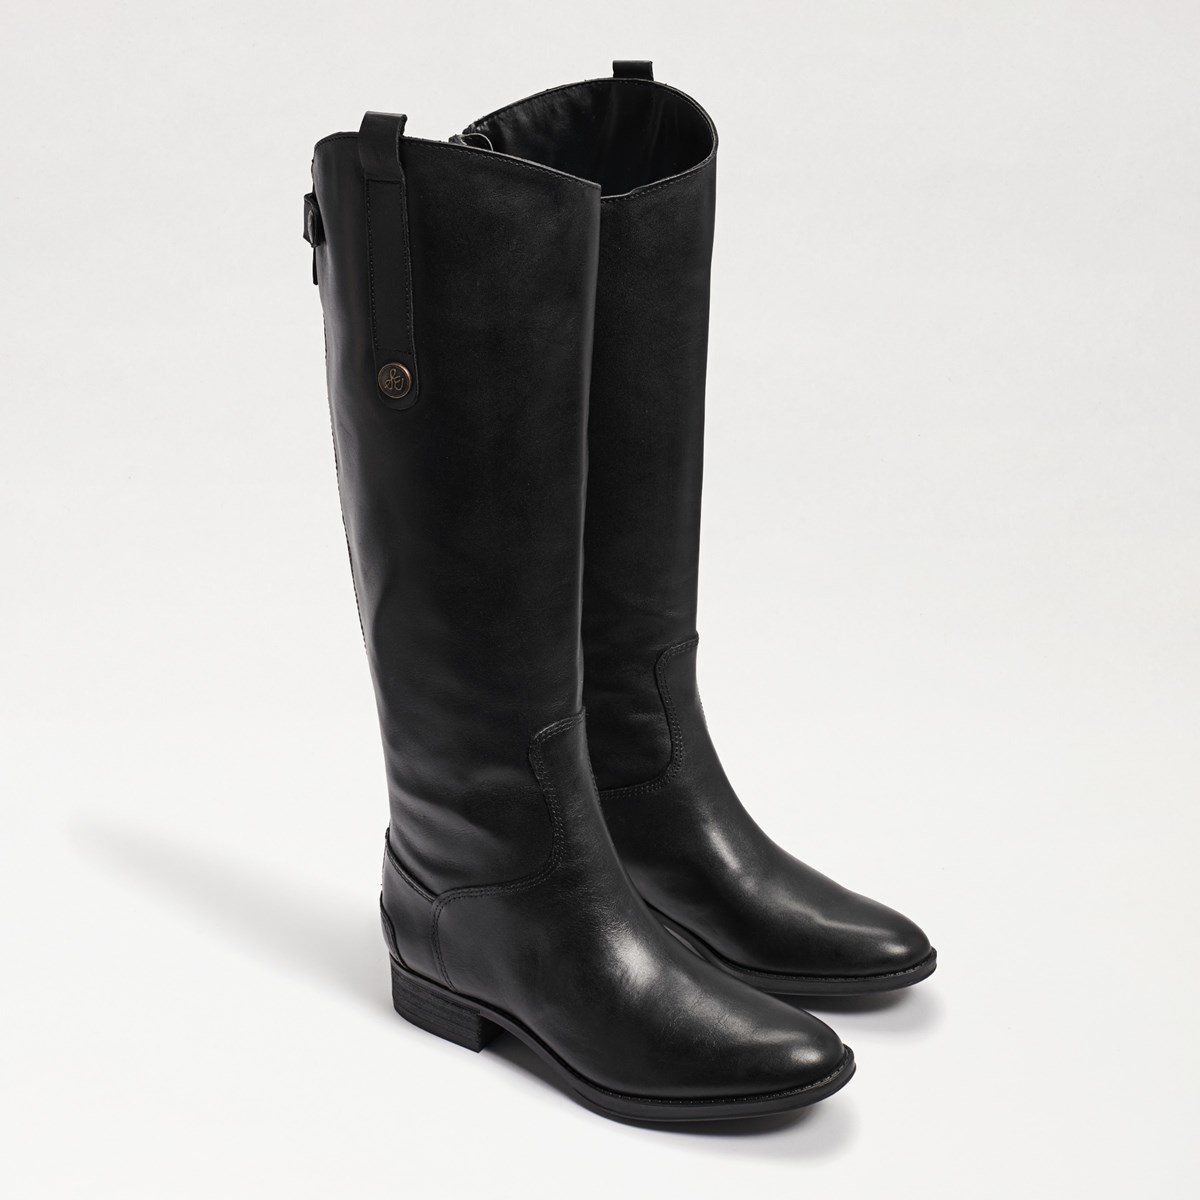 Sam Edelman Penny Leather Riding Boot | Women's Boots and Booties